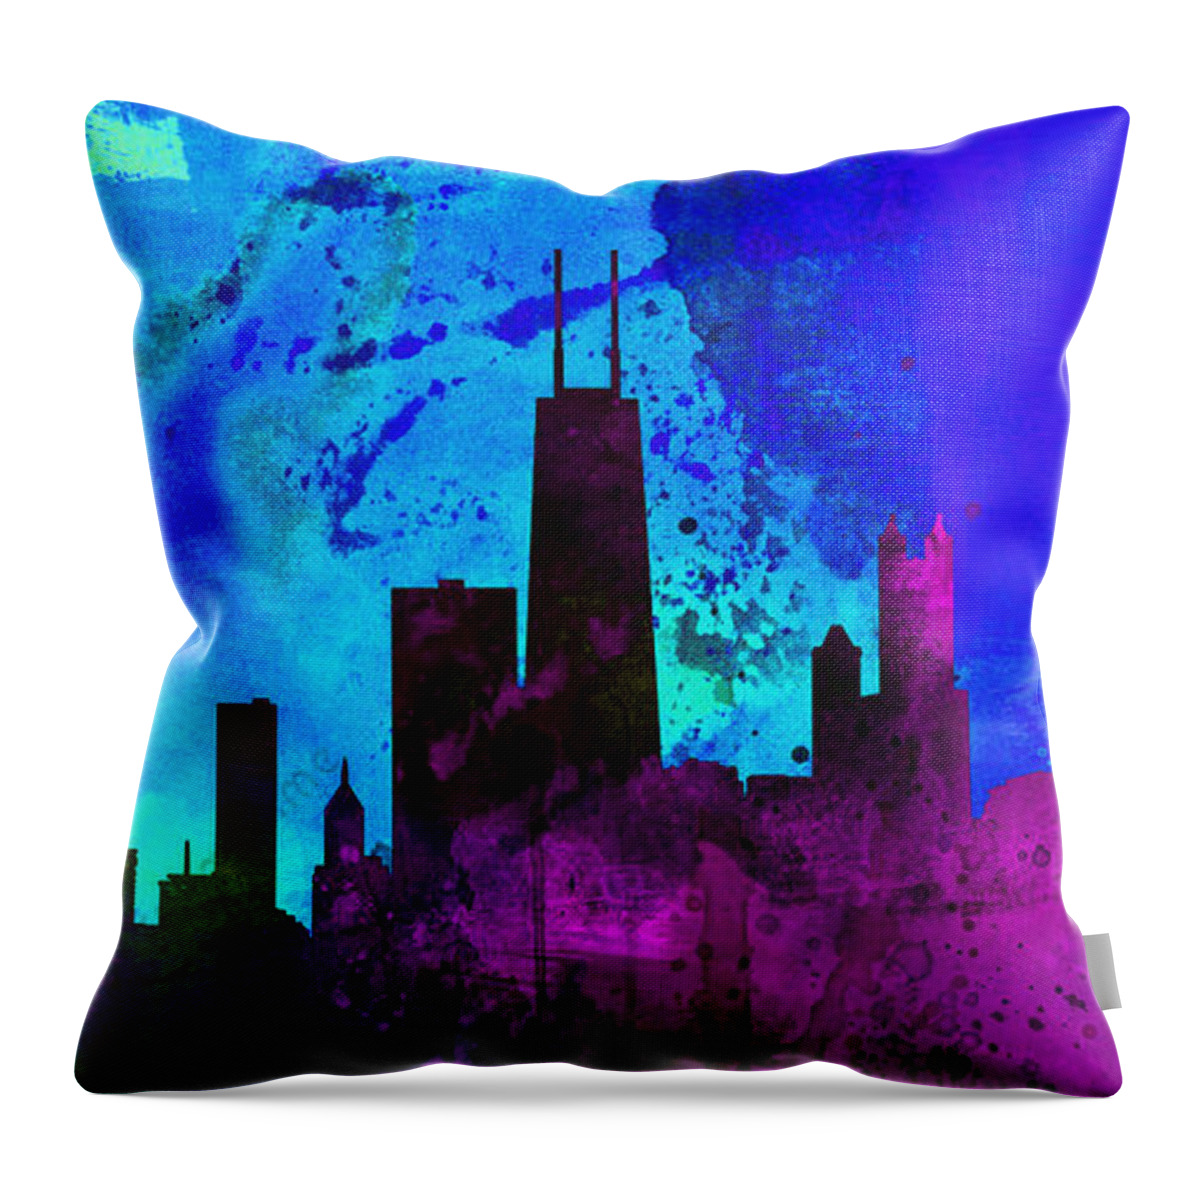 Chicago Throw Pillow featuring the painting Chicago City Skyline by Naxart Studio